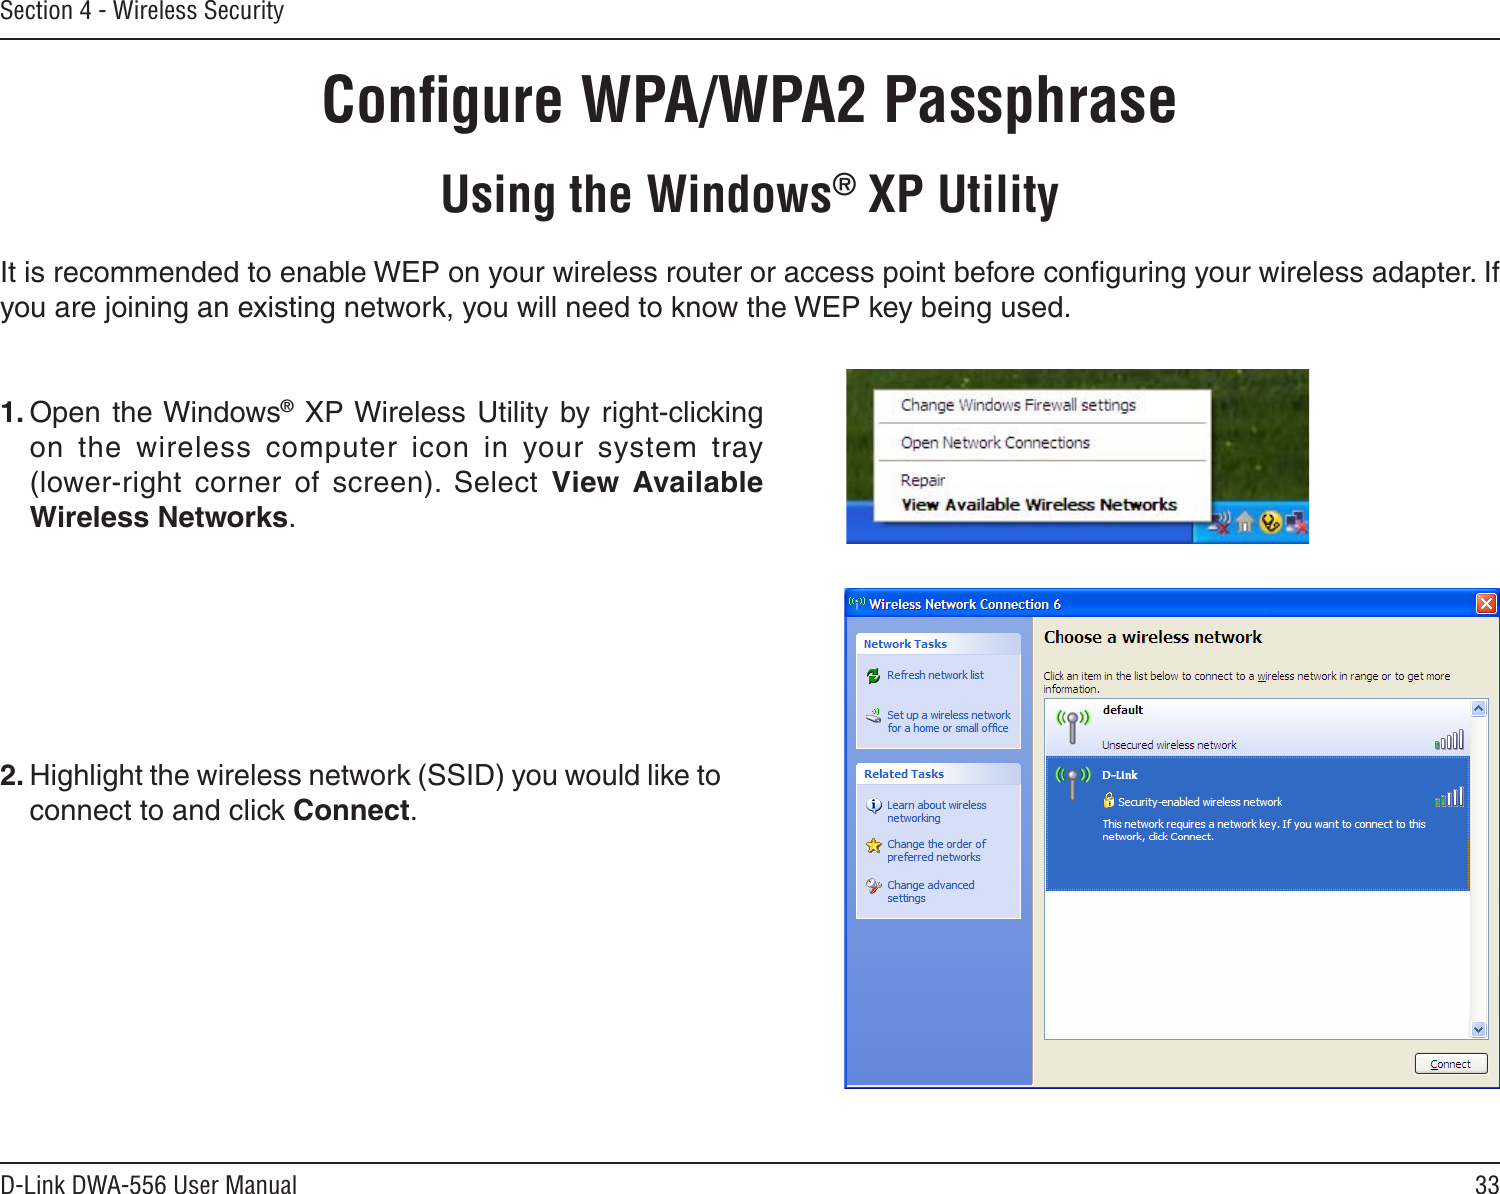 33D-Link DWA-556 User ManualSection 4 - Wireless SecurityConﬁgure WPA/WPA2 PassphraseUsing the Windows® XP UtilityIt is recommended to enable WEP on your wireless router or access point before conﬁguring your wireless adapter. If you are joining an existing network, you will need to know the WEP key being used.2. Highlight the wireless network (SSID) you would like to connect to and click Connect.1. Open the Windows® XP Wireless  Utility  by right-clicking on  the  wireless  computer  icon  in  your  system  tray  (lower-right  corner  of  screen).  Select  View  Available Wireless Networks. 